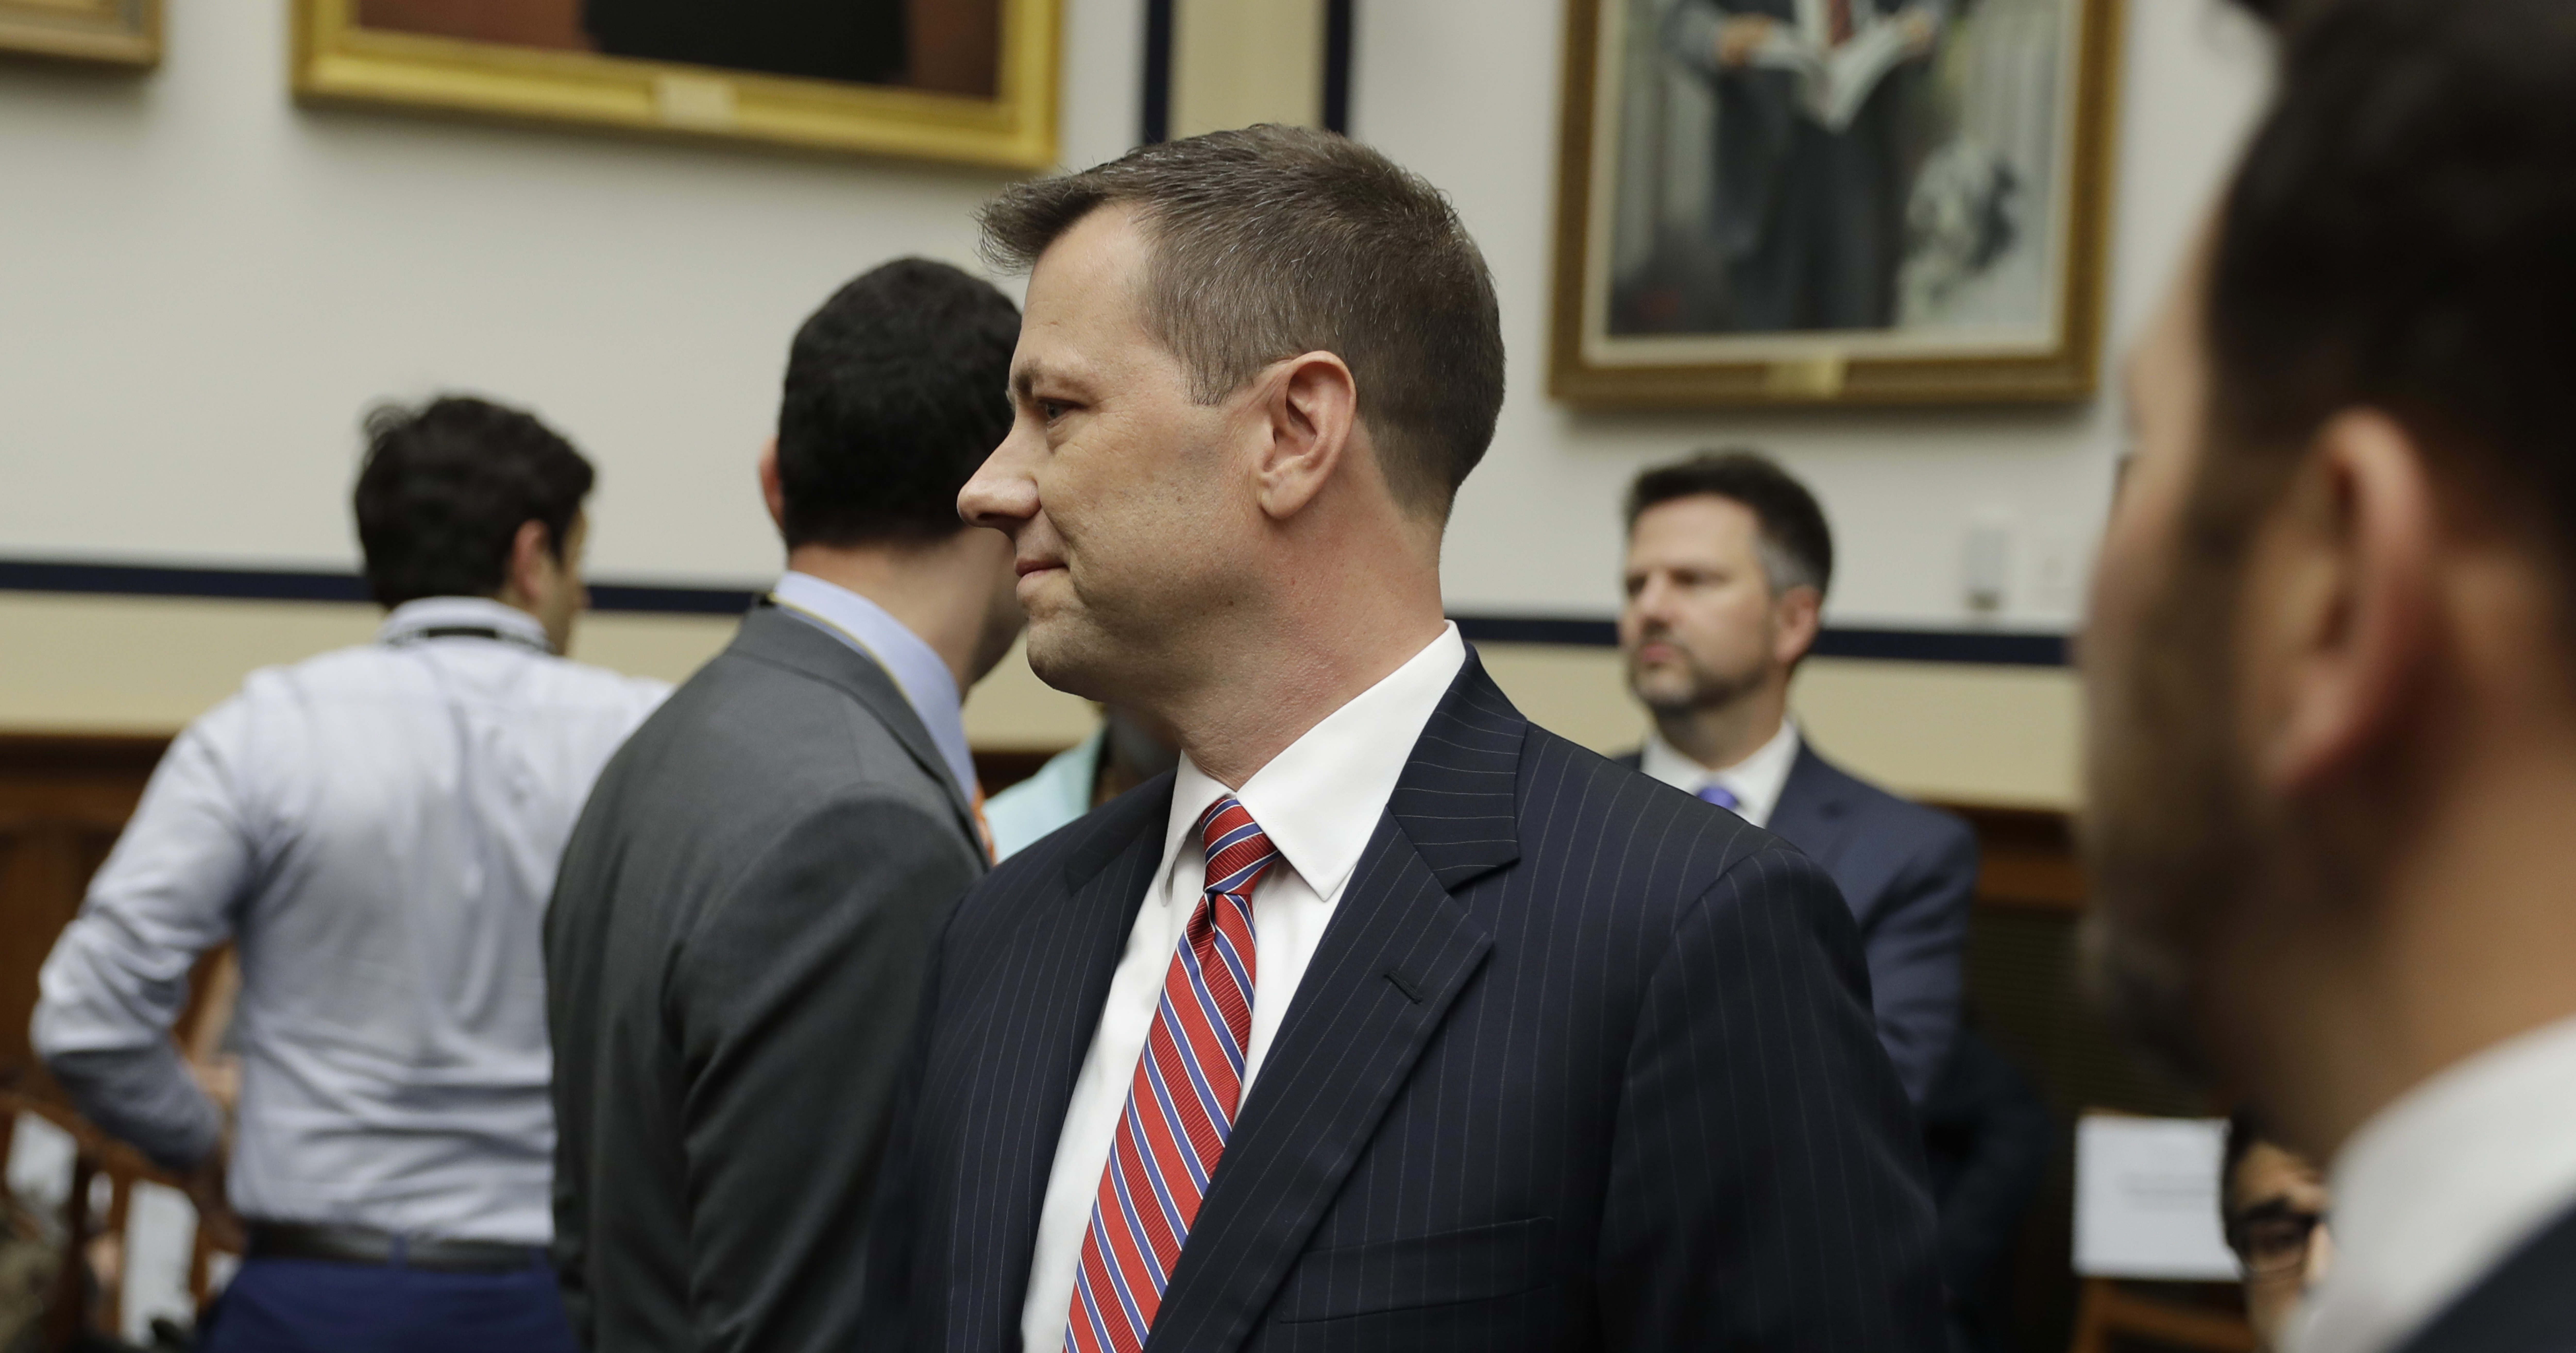 FBI Deputy Assistant Director Peter Strzok, center, arrives to a hearing of the House Committees on the Judiciary and Oversight and Government Reform on "Oversight of FBI and DOJ Actions Surrounding the 2016 Election," on Capitol Hill, Thursday, July 12, 2018, in Washington.